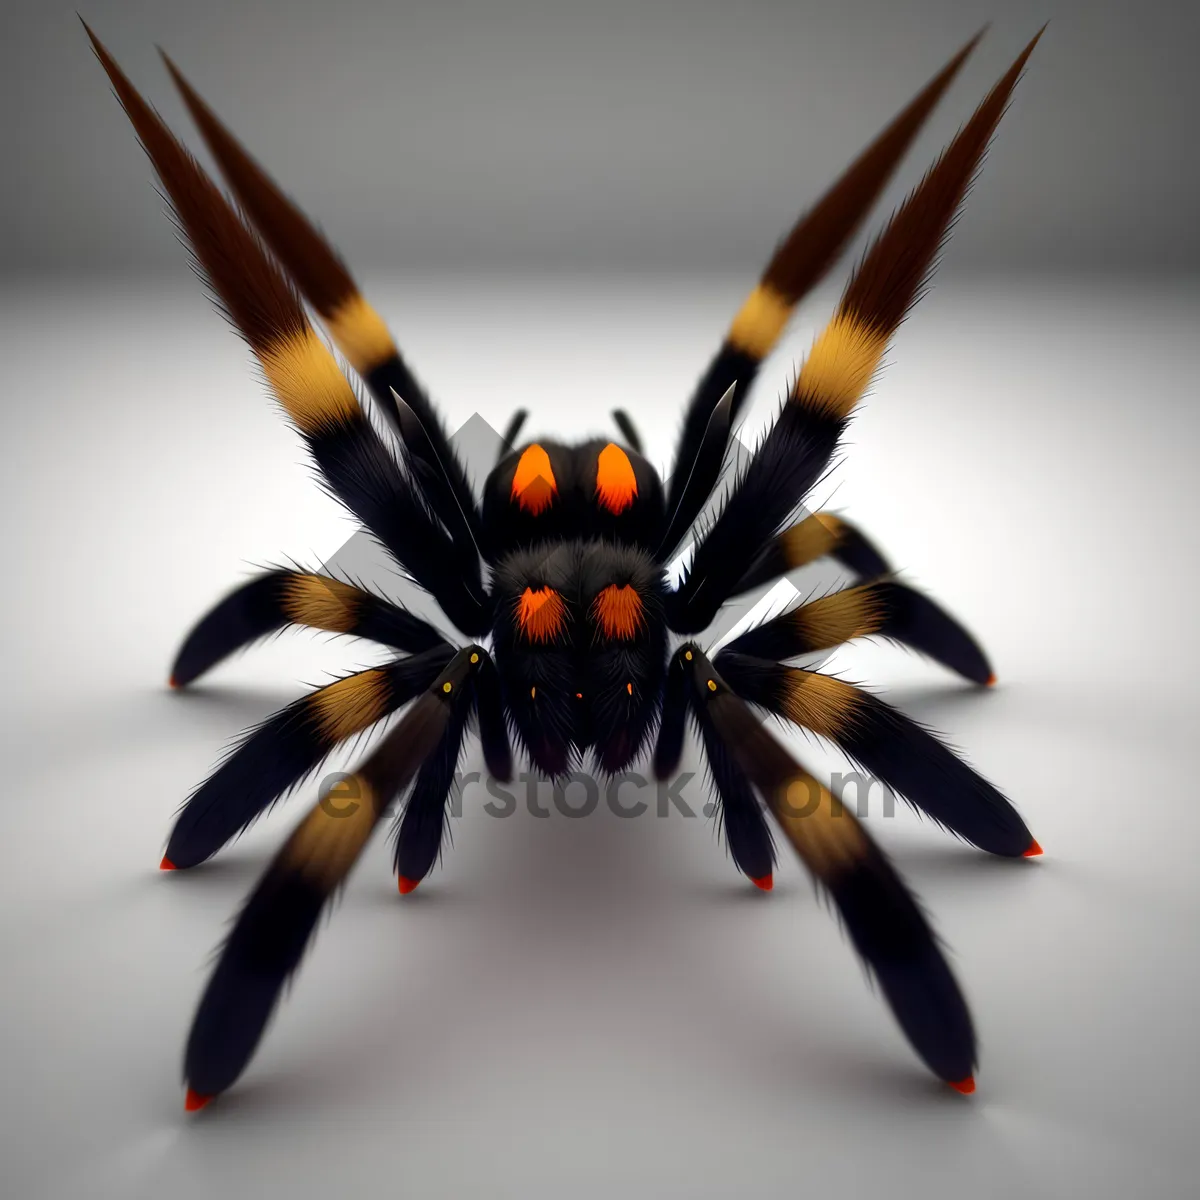 Picture of Spider pencil drawing on black background